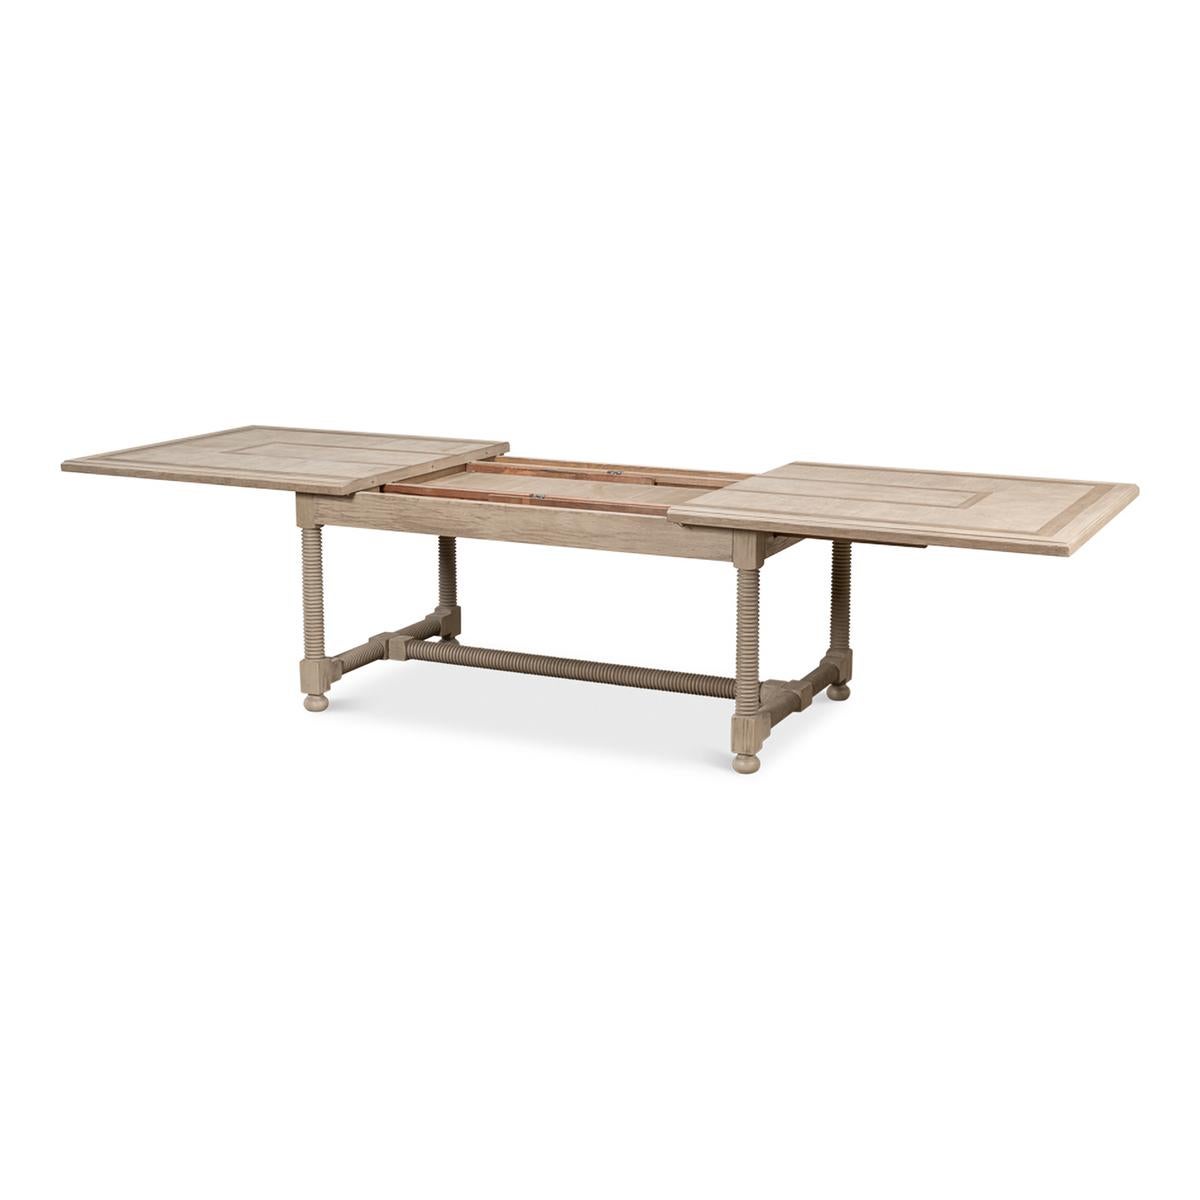 Asian Country Draw Leaf Extension Dining Table For Sale